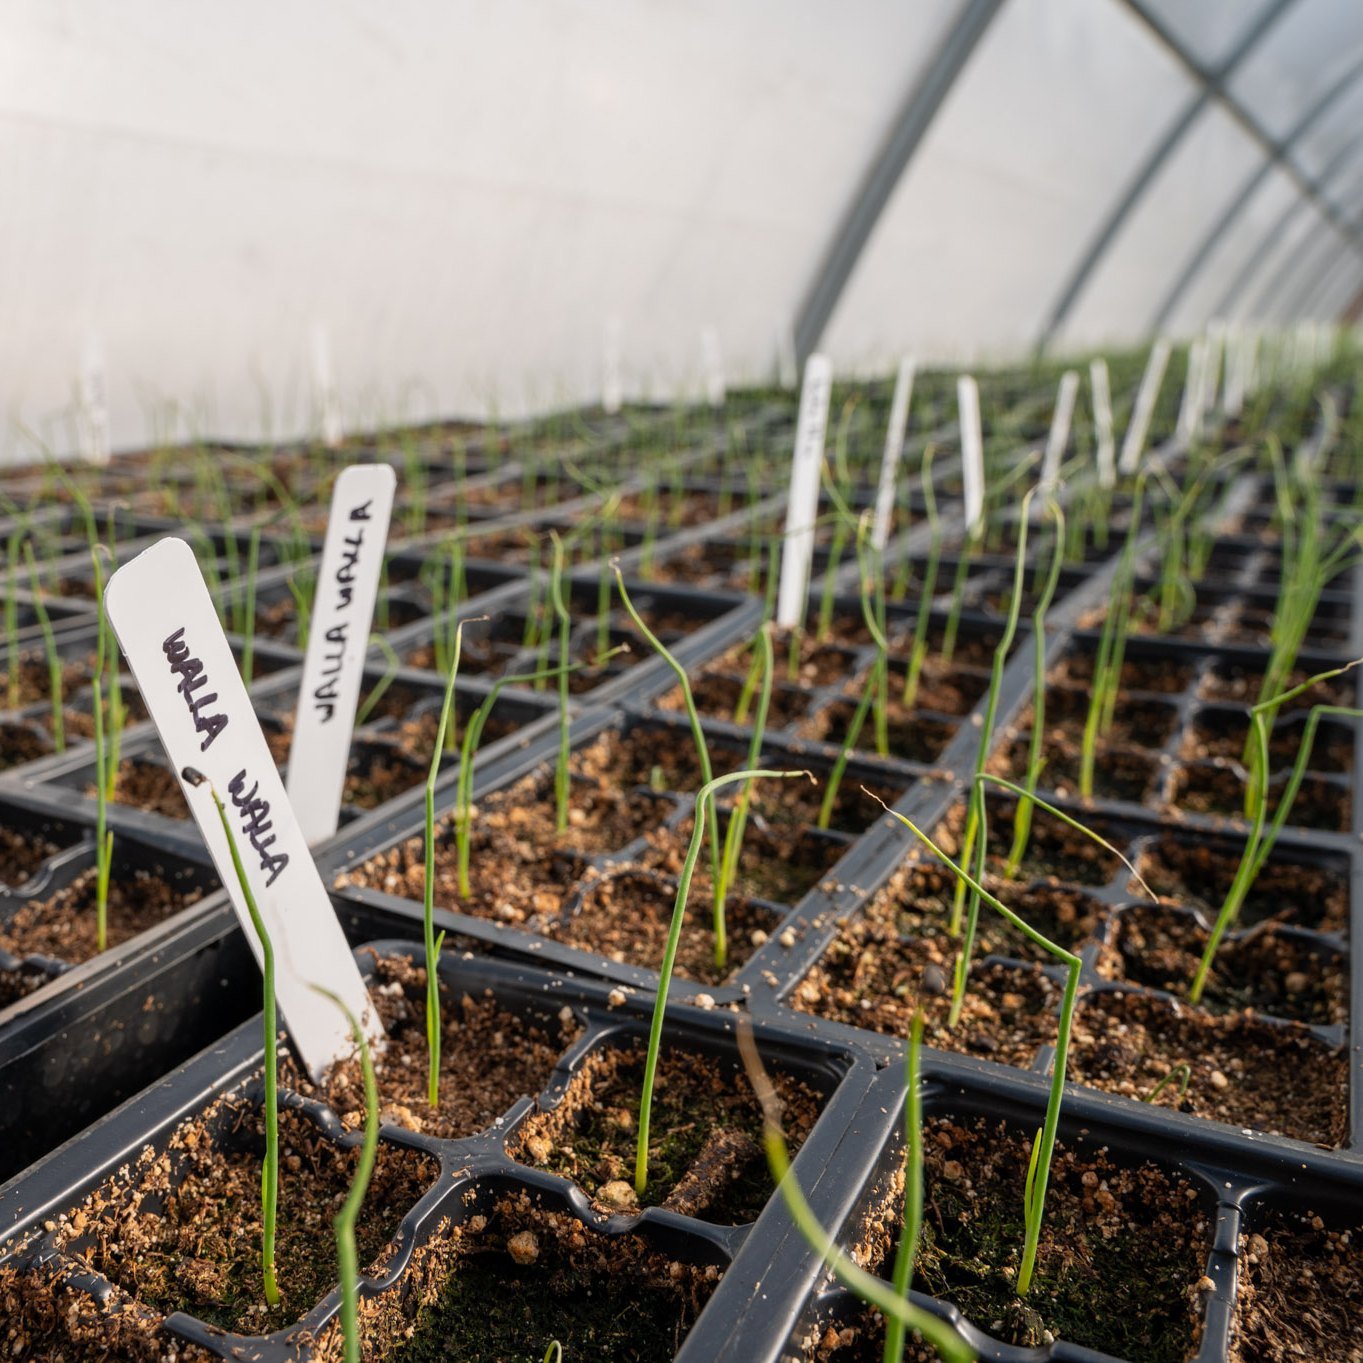 Our greenhouse is where the magic really happens.
Can you believe that these small, thin sprouts are going to become the huge, super sweet Walla-Walla onions? 
Aren't they delicious?

Just 11 days until we open!